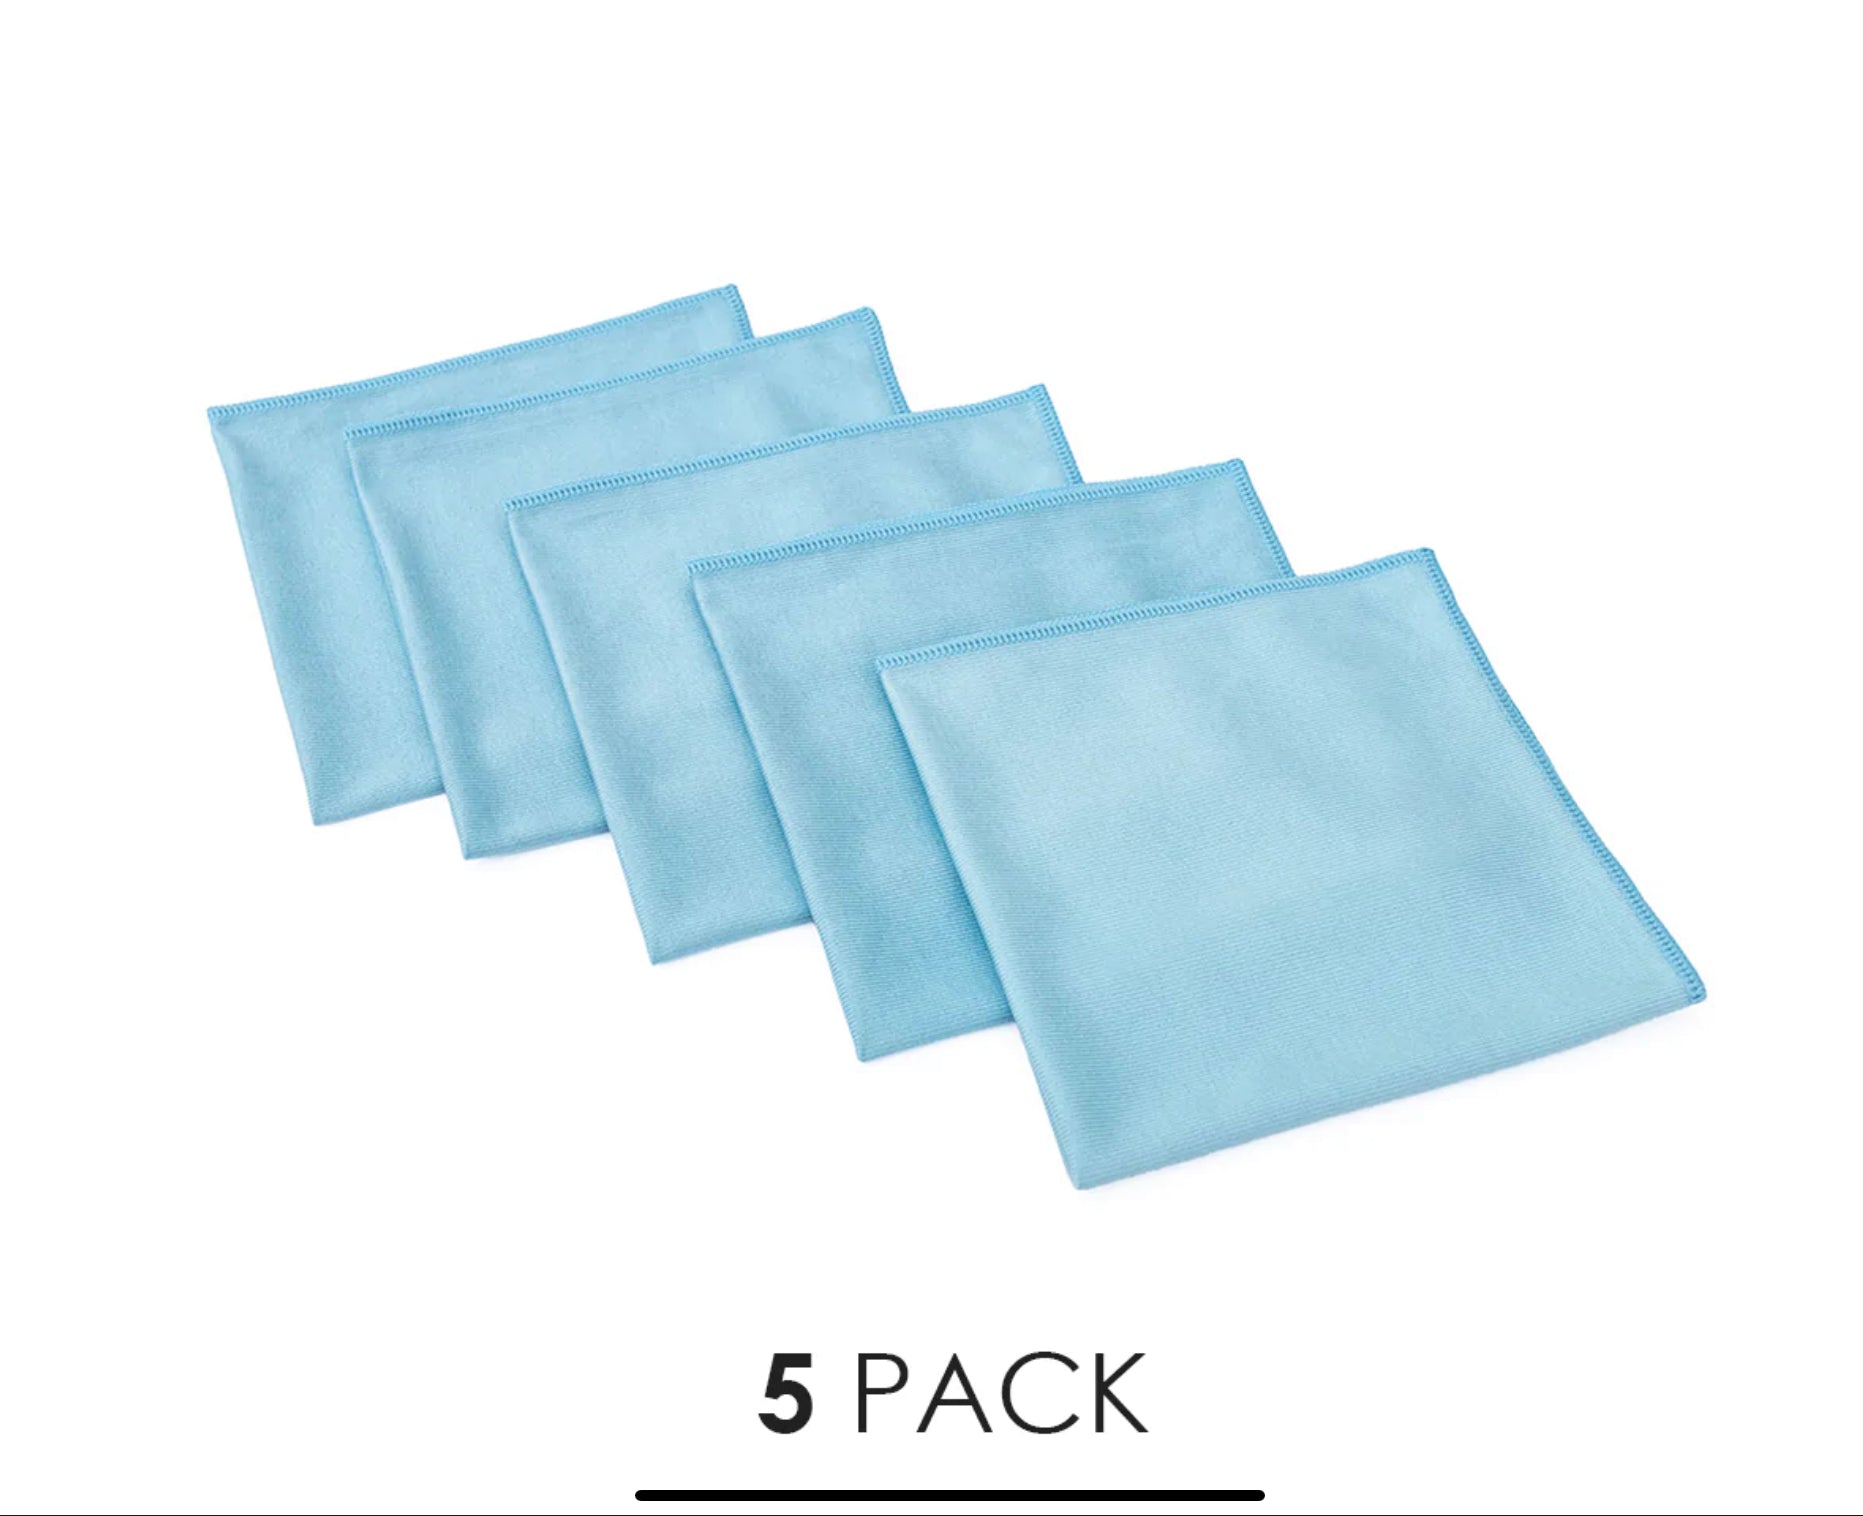 10 Pack of Blue Edgeless 365 Towel by The Rag Company - MVP Distributing of  Boise